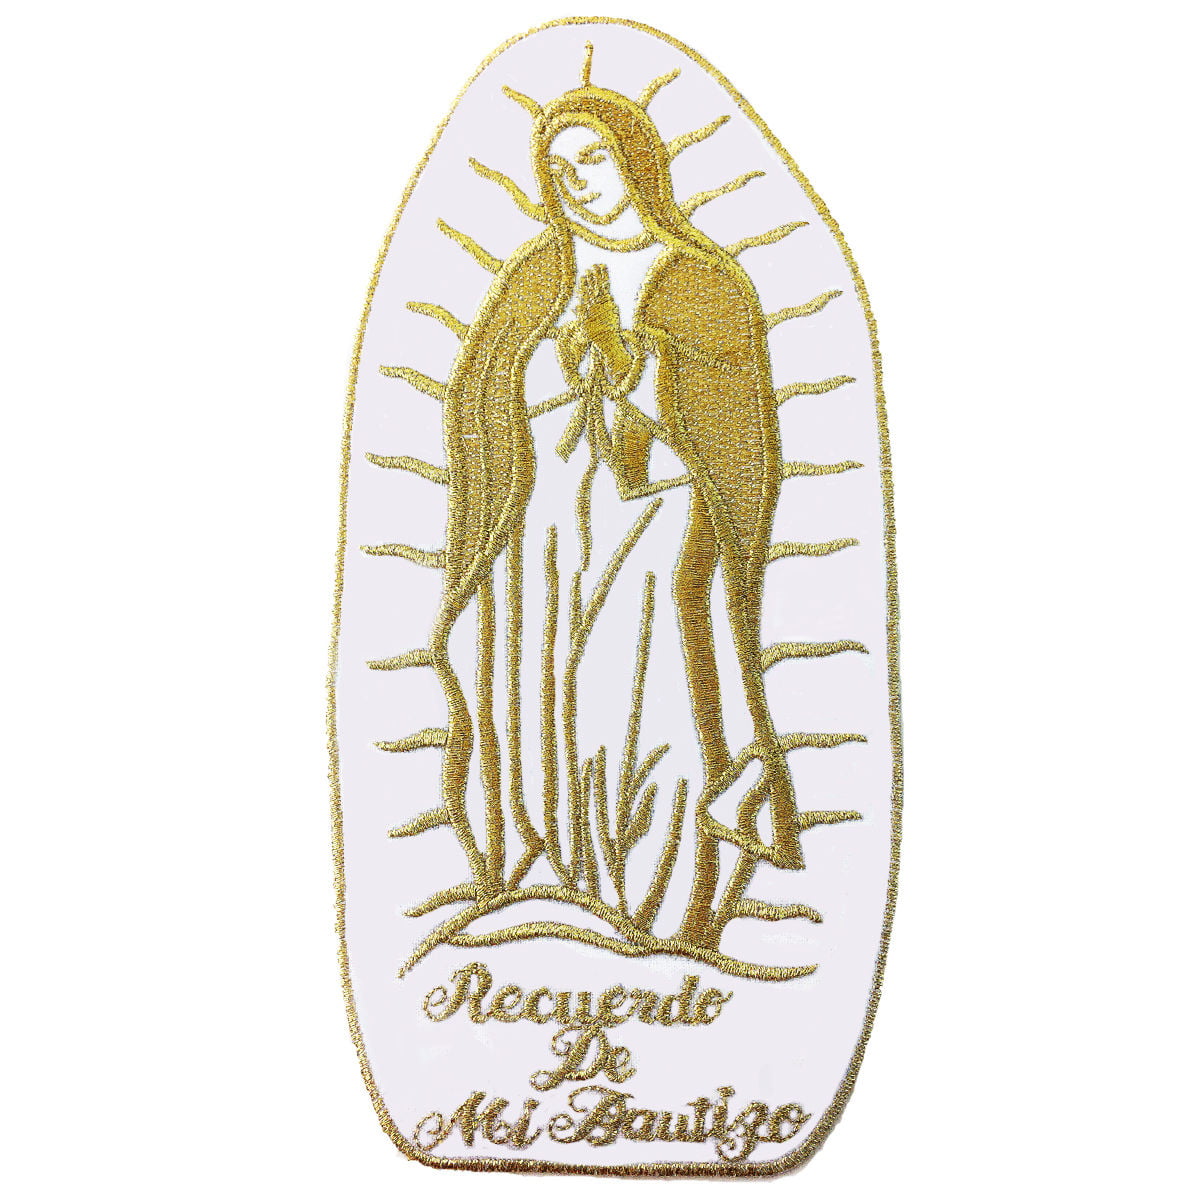 Baptism Virgin Mary Santa Maria Guadalupe Christening Embroidered Iron On Patch 